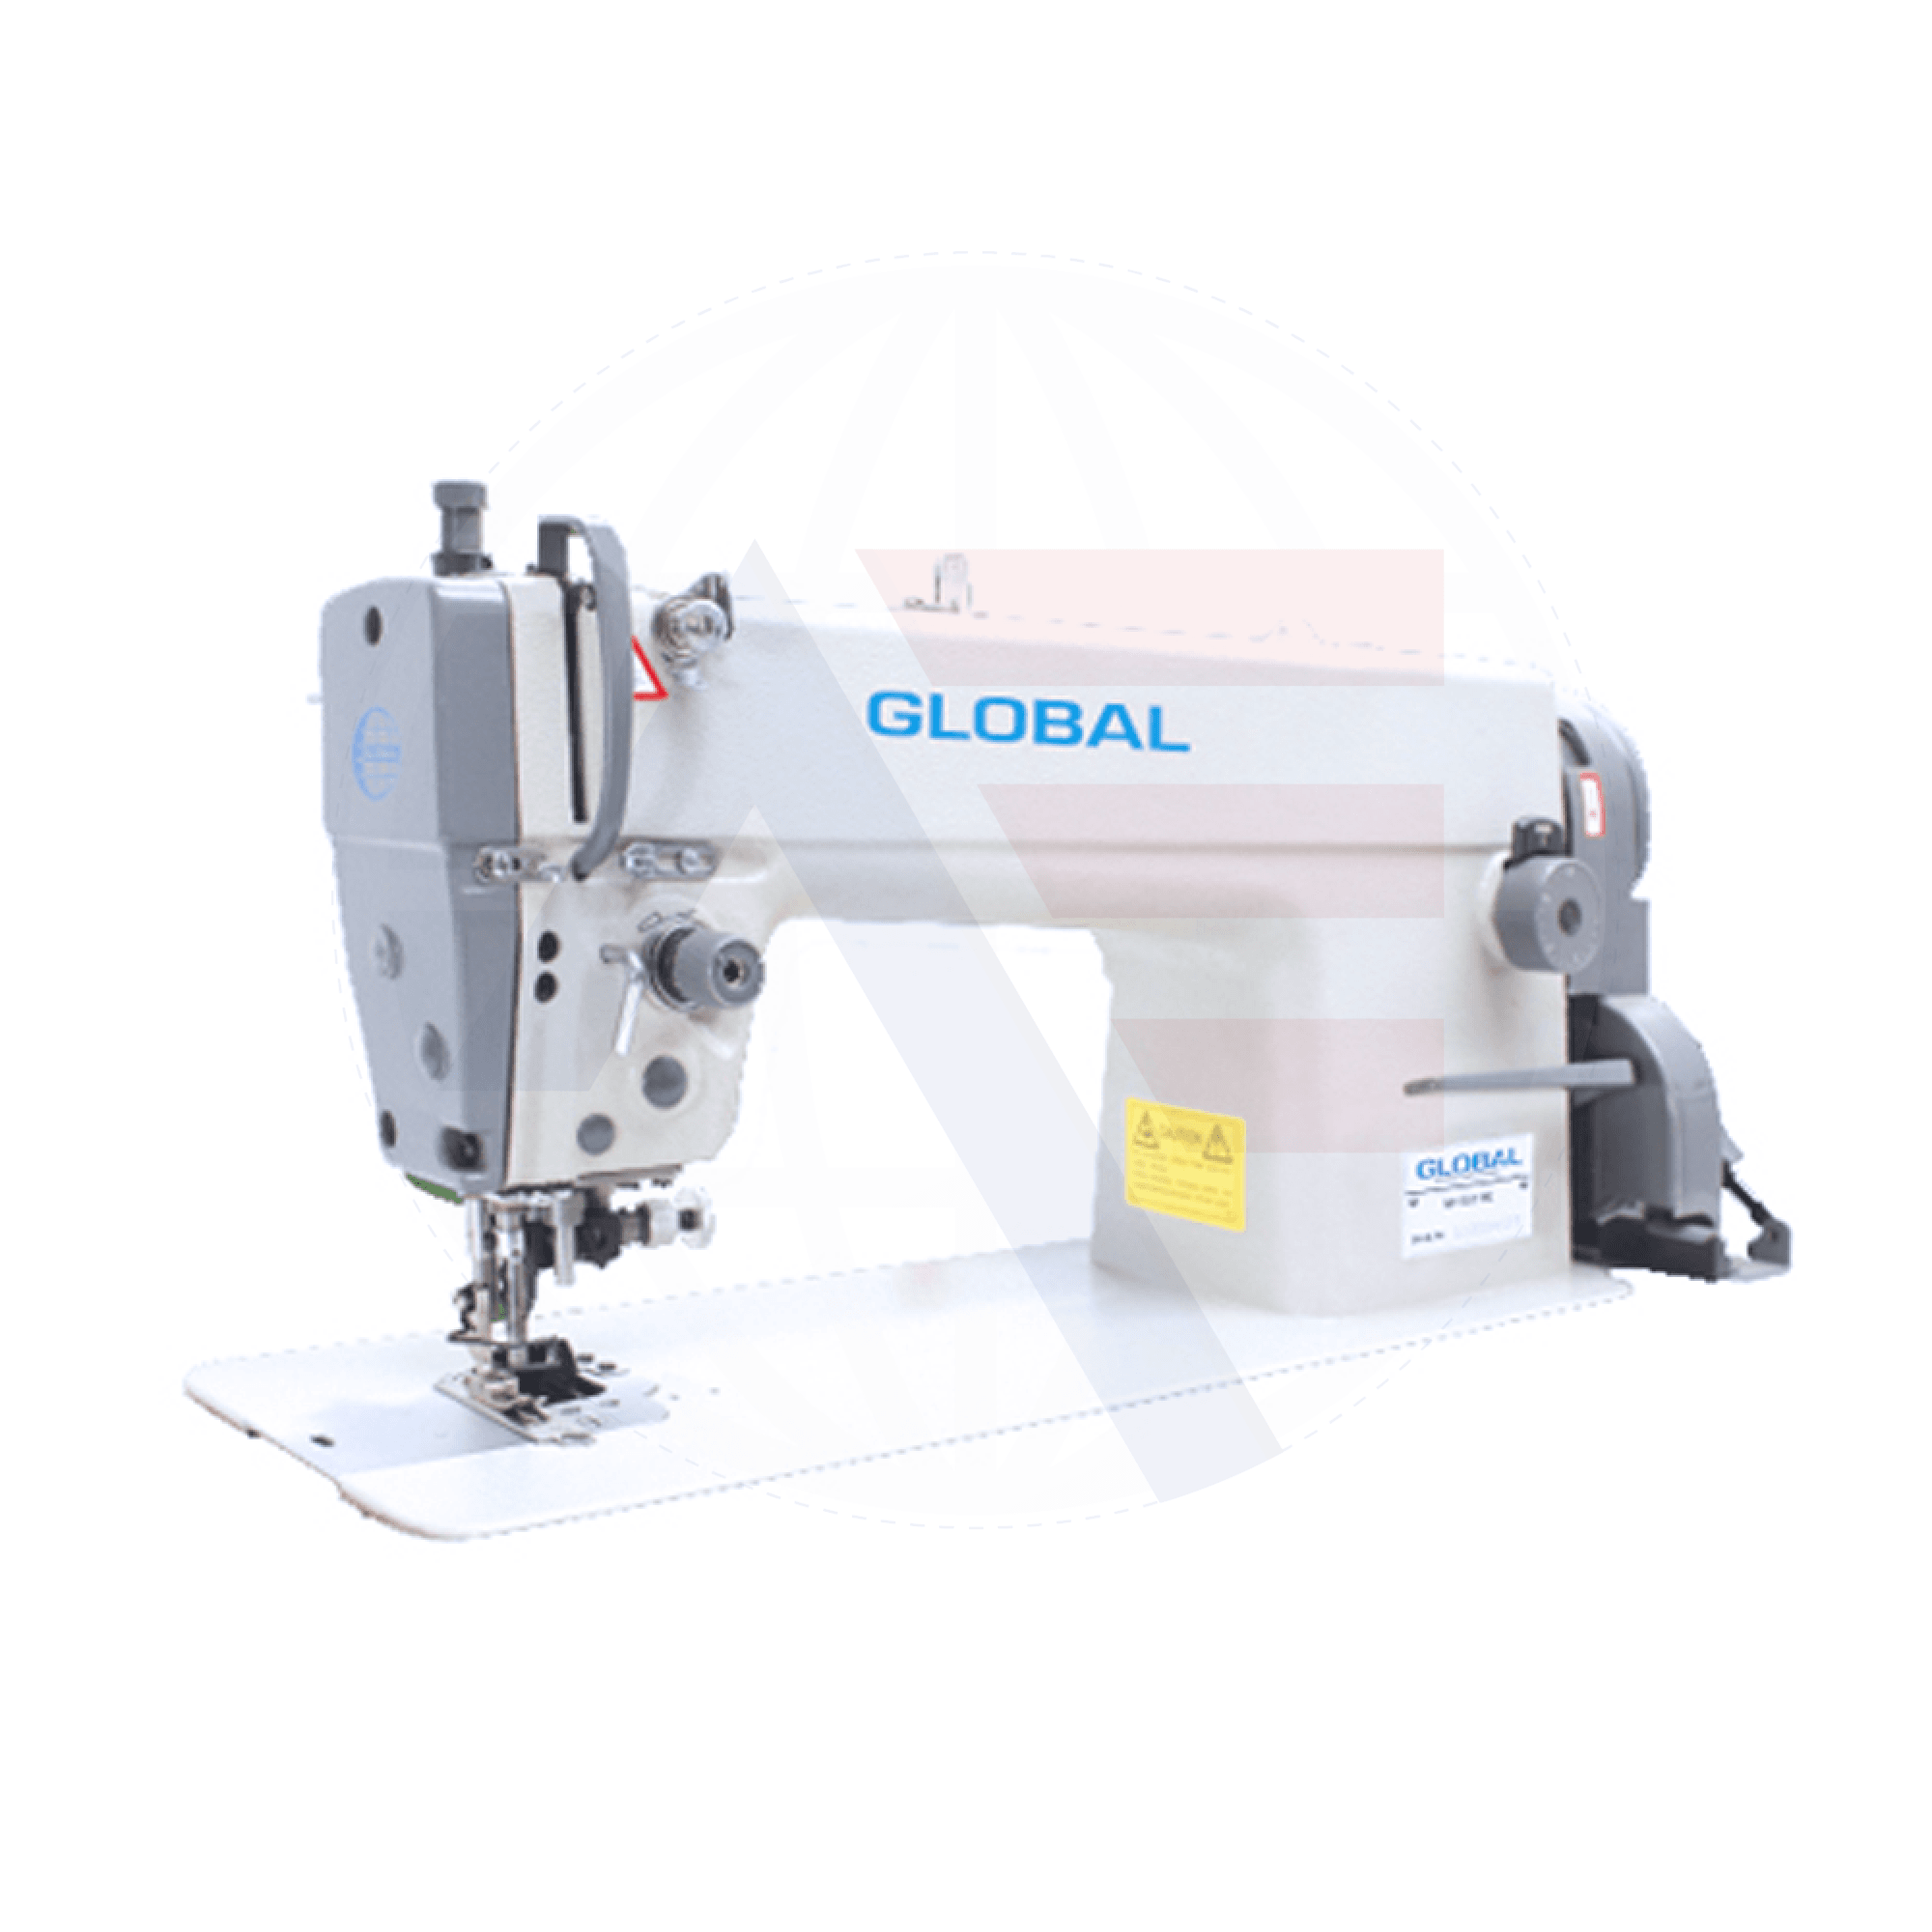 Global Nf 331 Sk Series Needle-Feed Lockstitch Machine (With Side-Knife) Sewing Machines